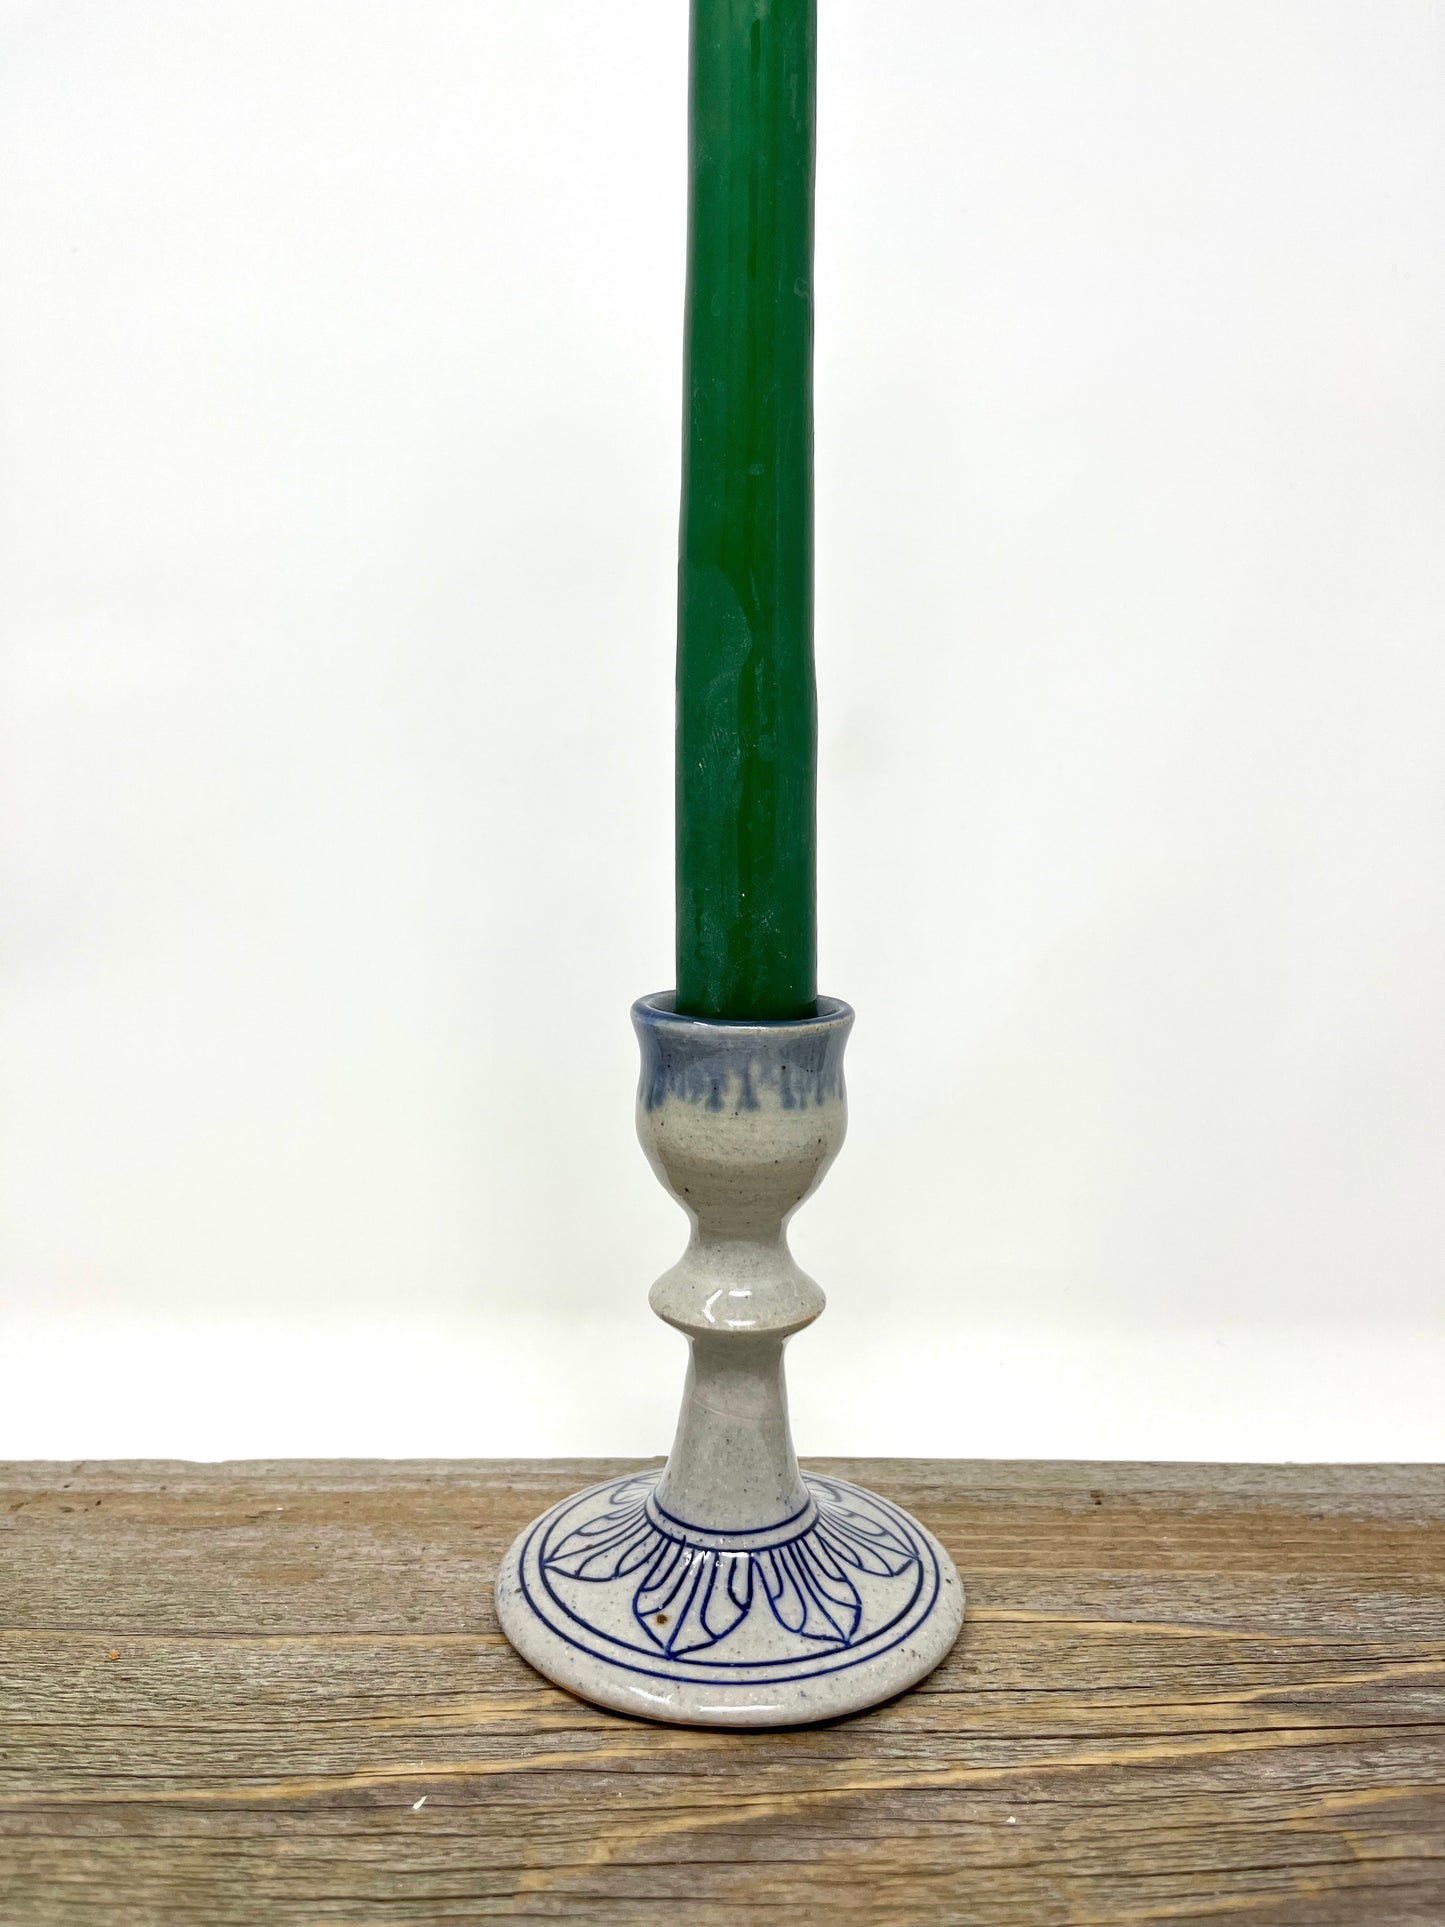 Art Deco Arches Candlestick in Blue and Gray #1